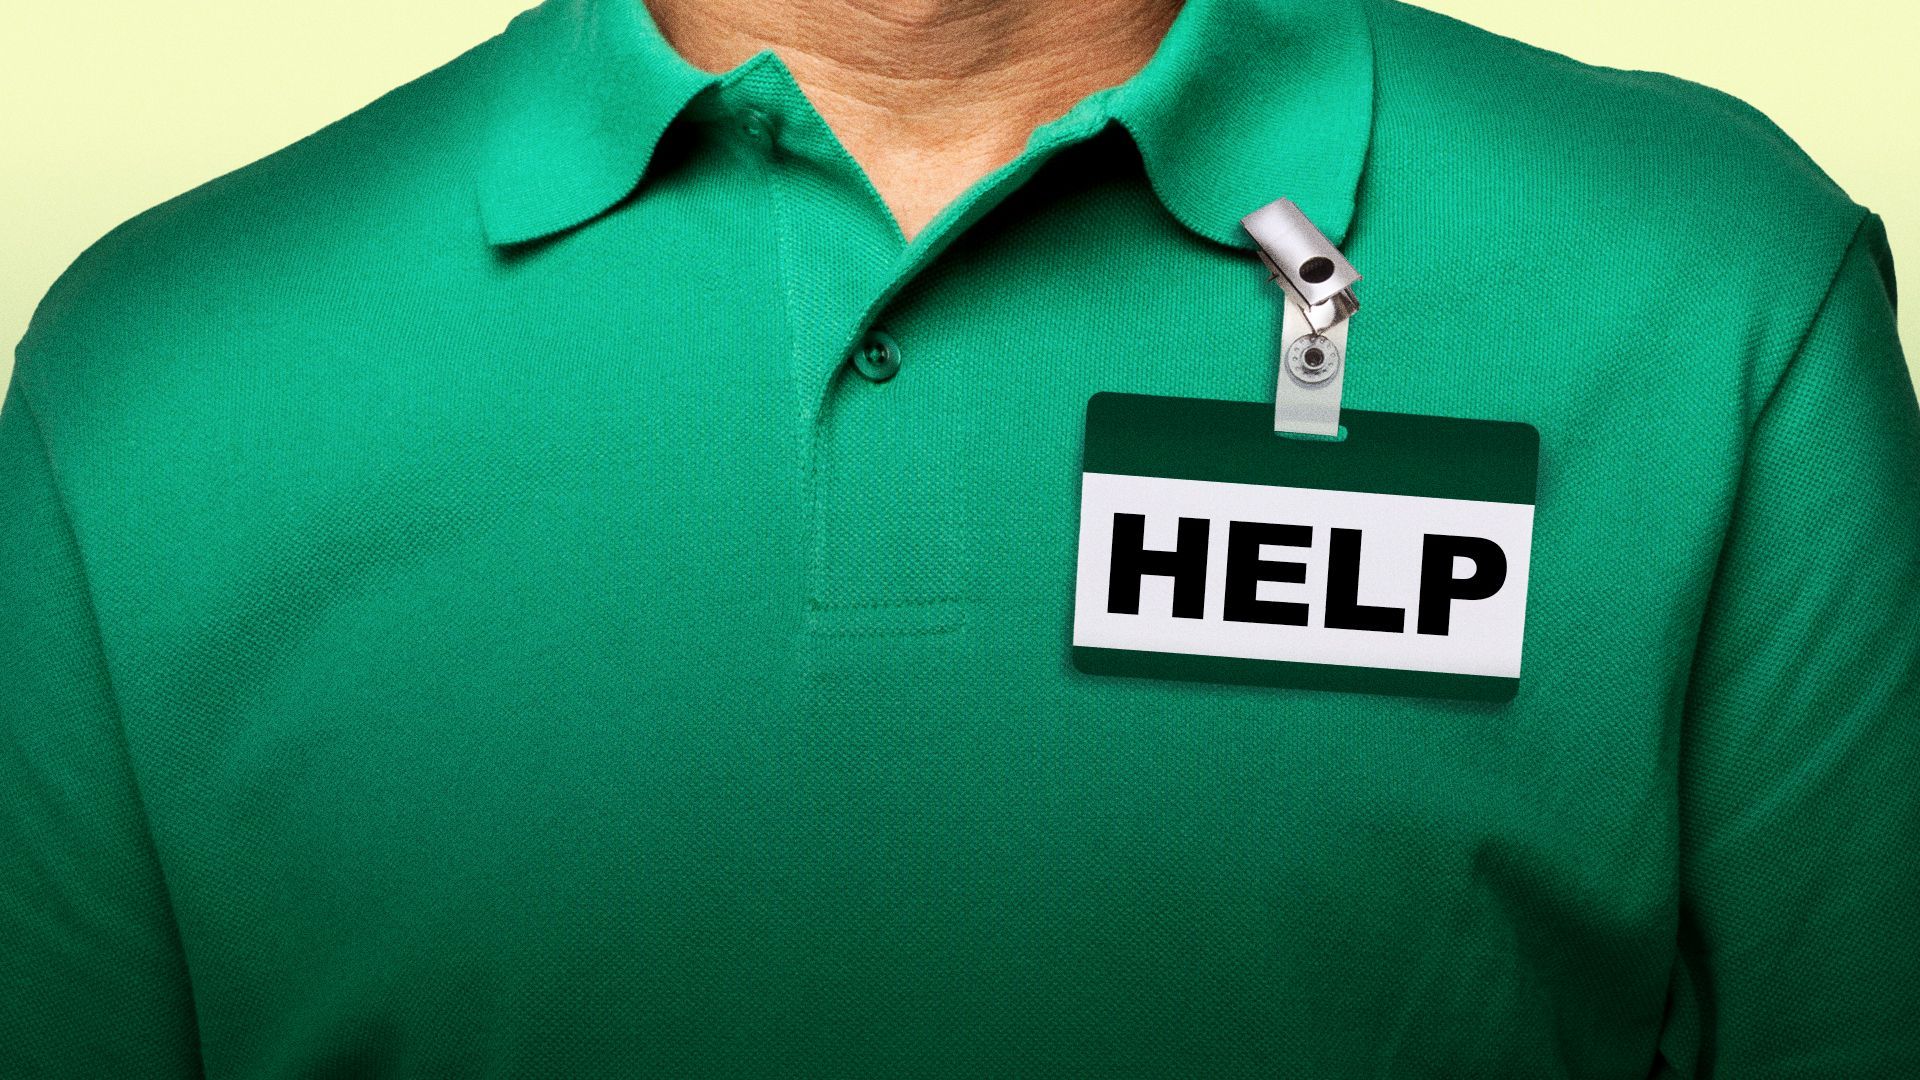 Illustration of an employee wearing a name tag that says "HELP".